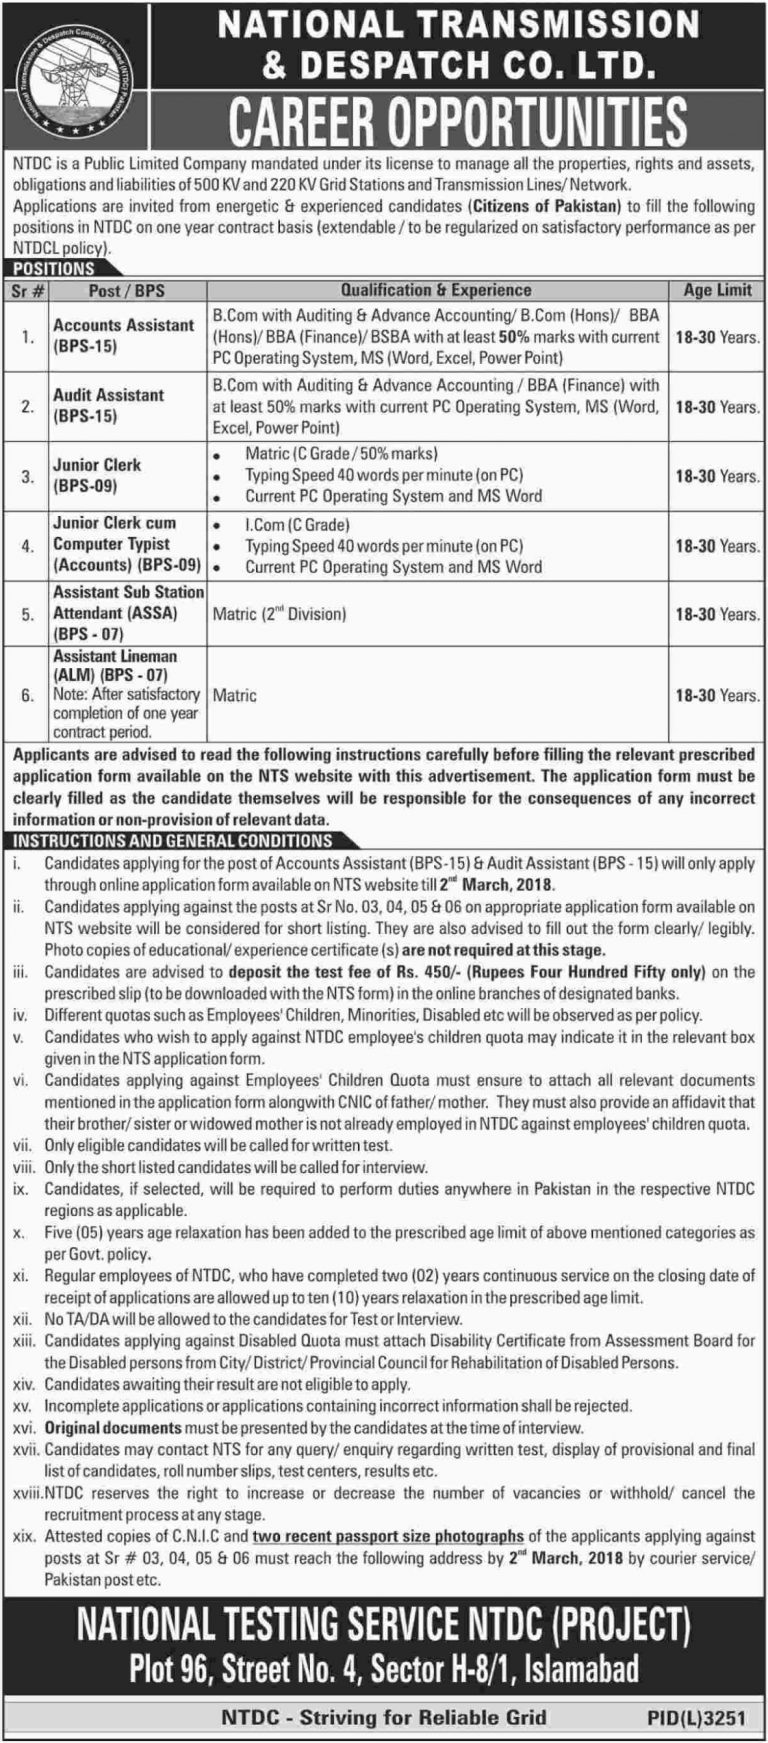 NTDC Lineman NTS Jobs Results 2018 National Transmission & Dispatch Company Assistant Lineman Jobs NTS Results 29th April 2018